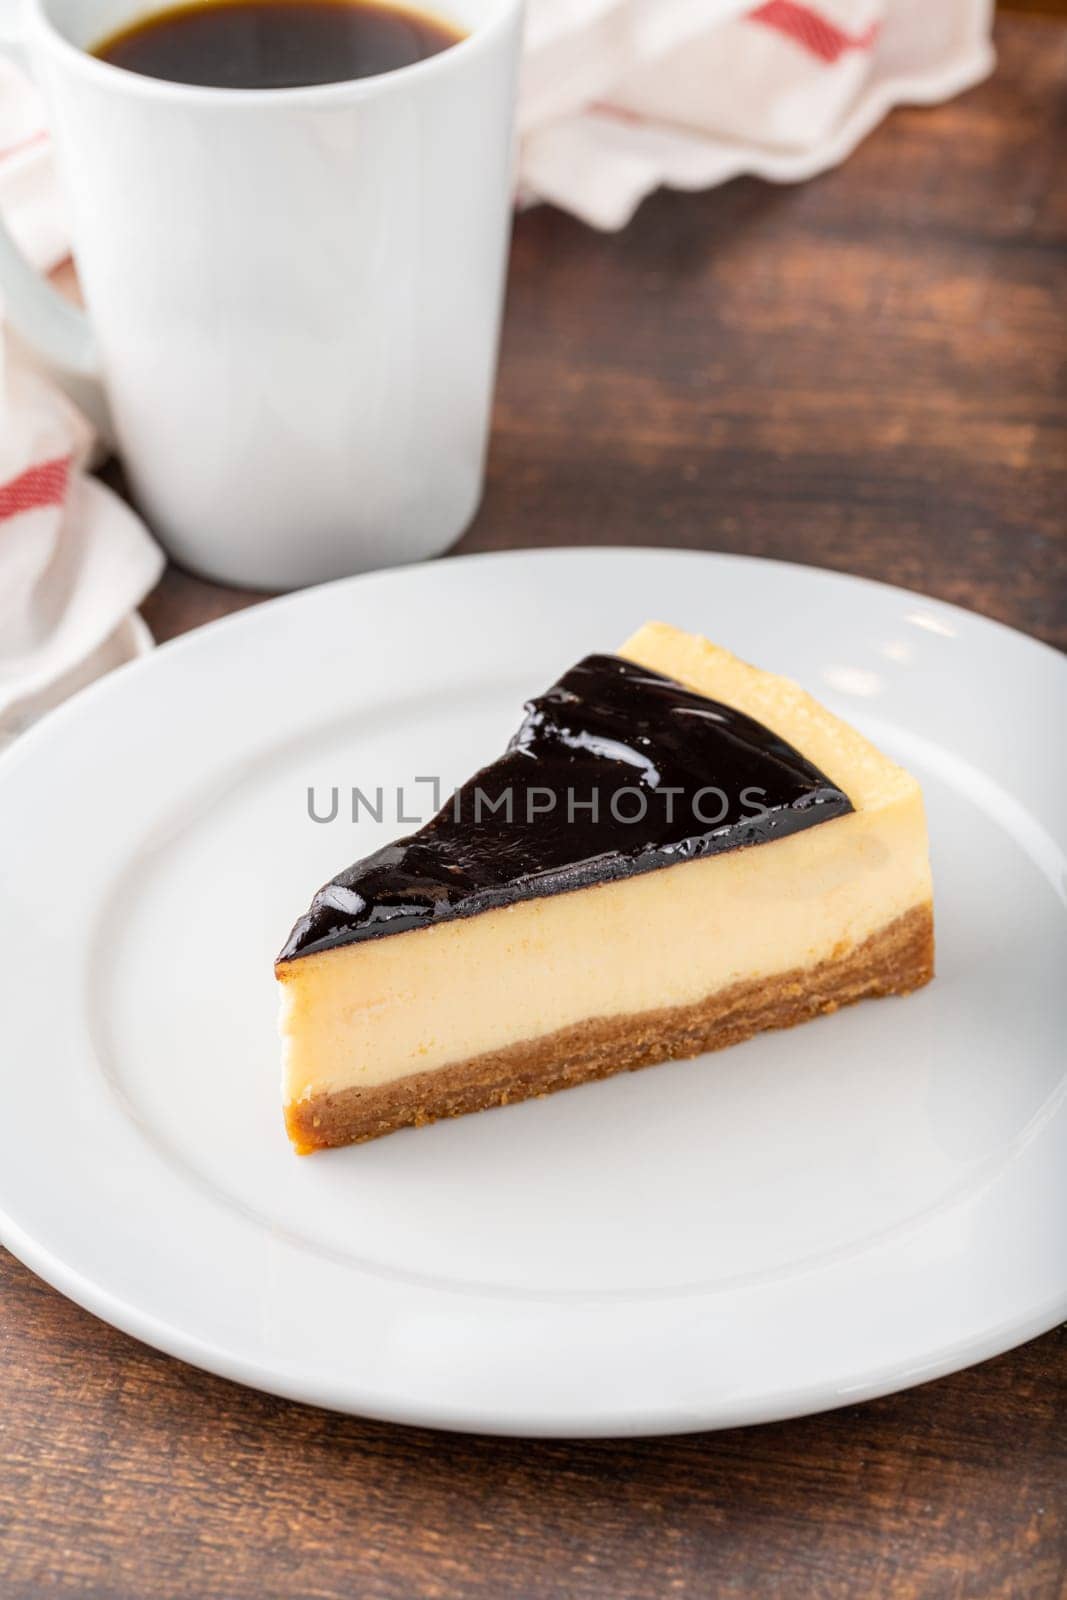 Chocolate cheesecake with brewing coffee on wooden table by Sonat